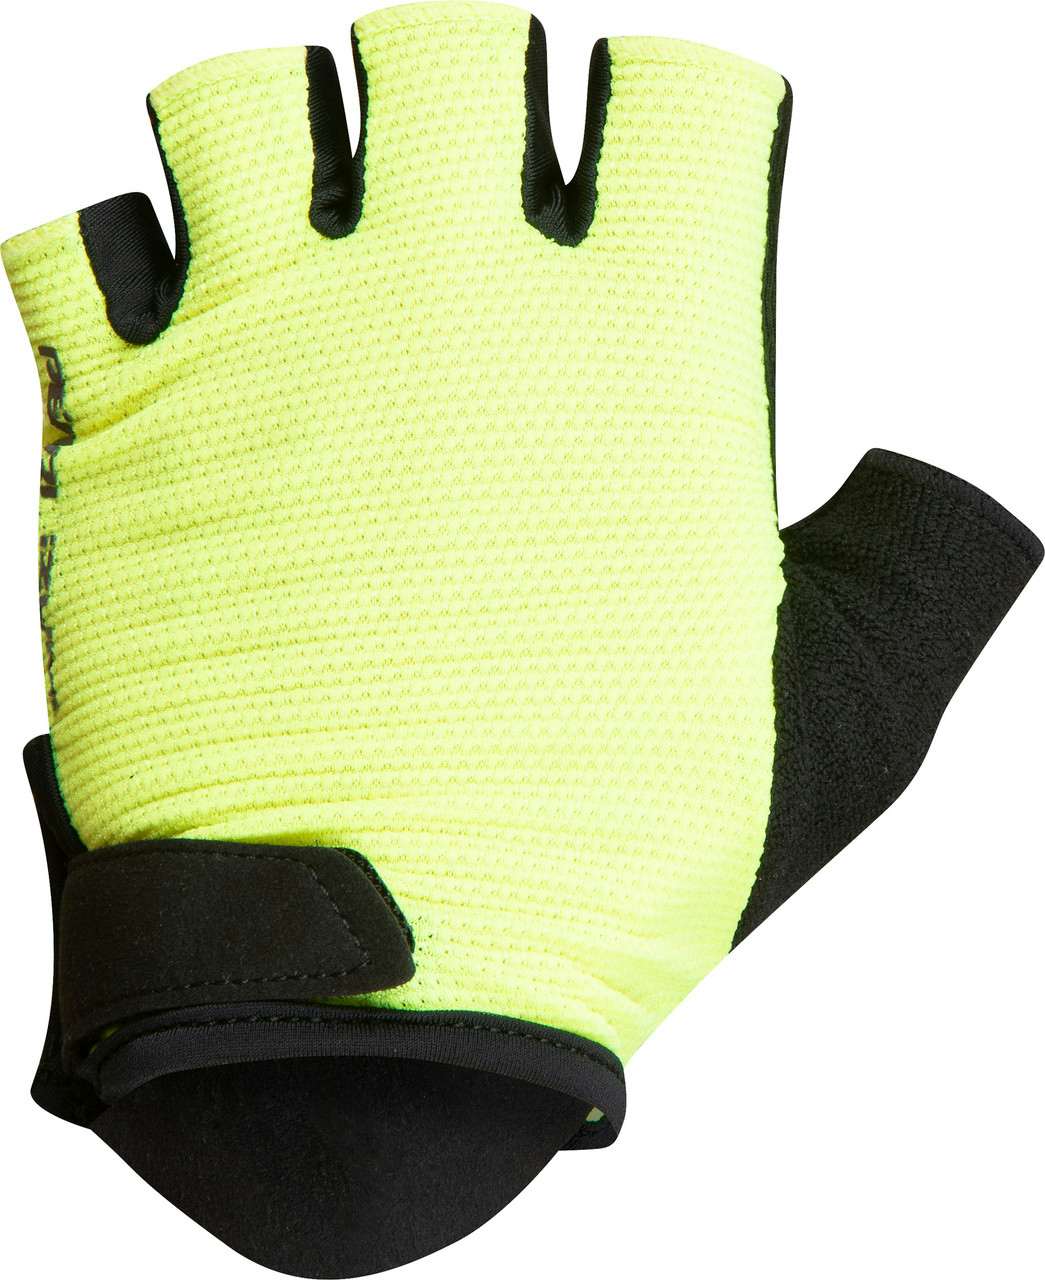 Quest Gel Gloves Screaming Yellow